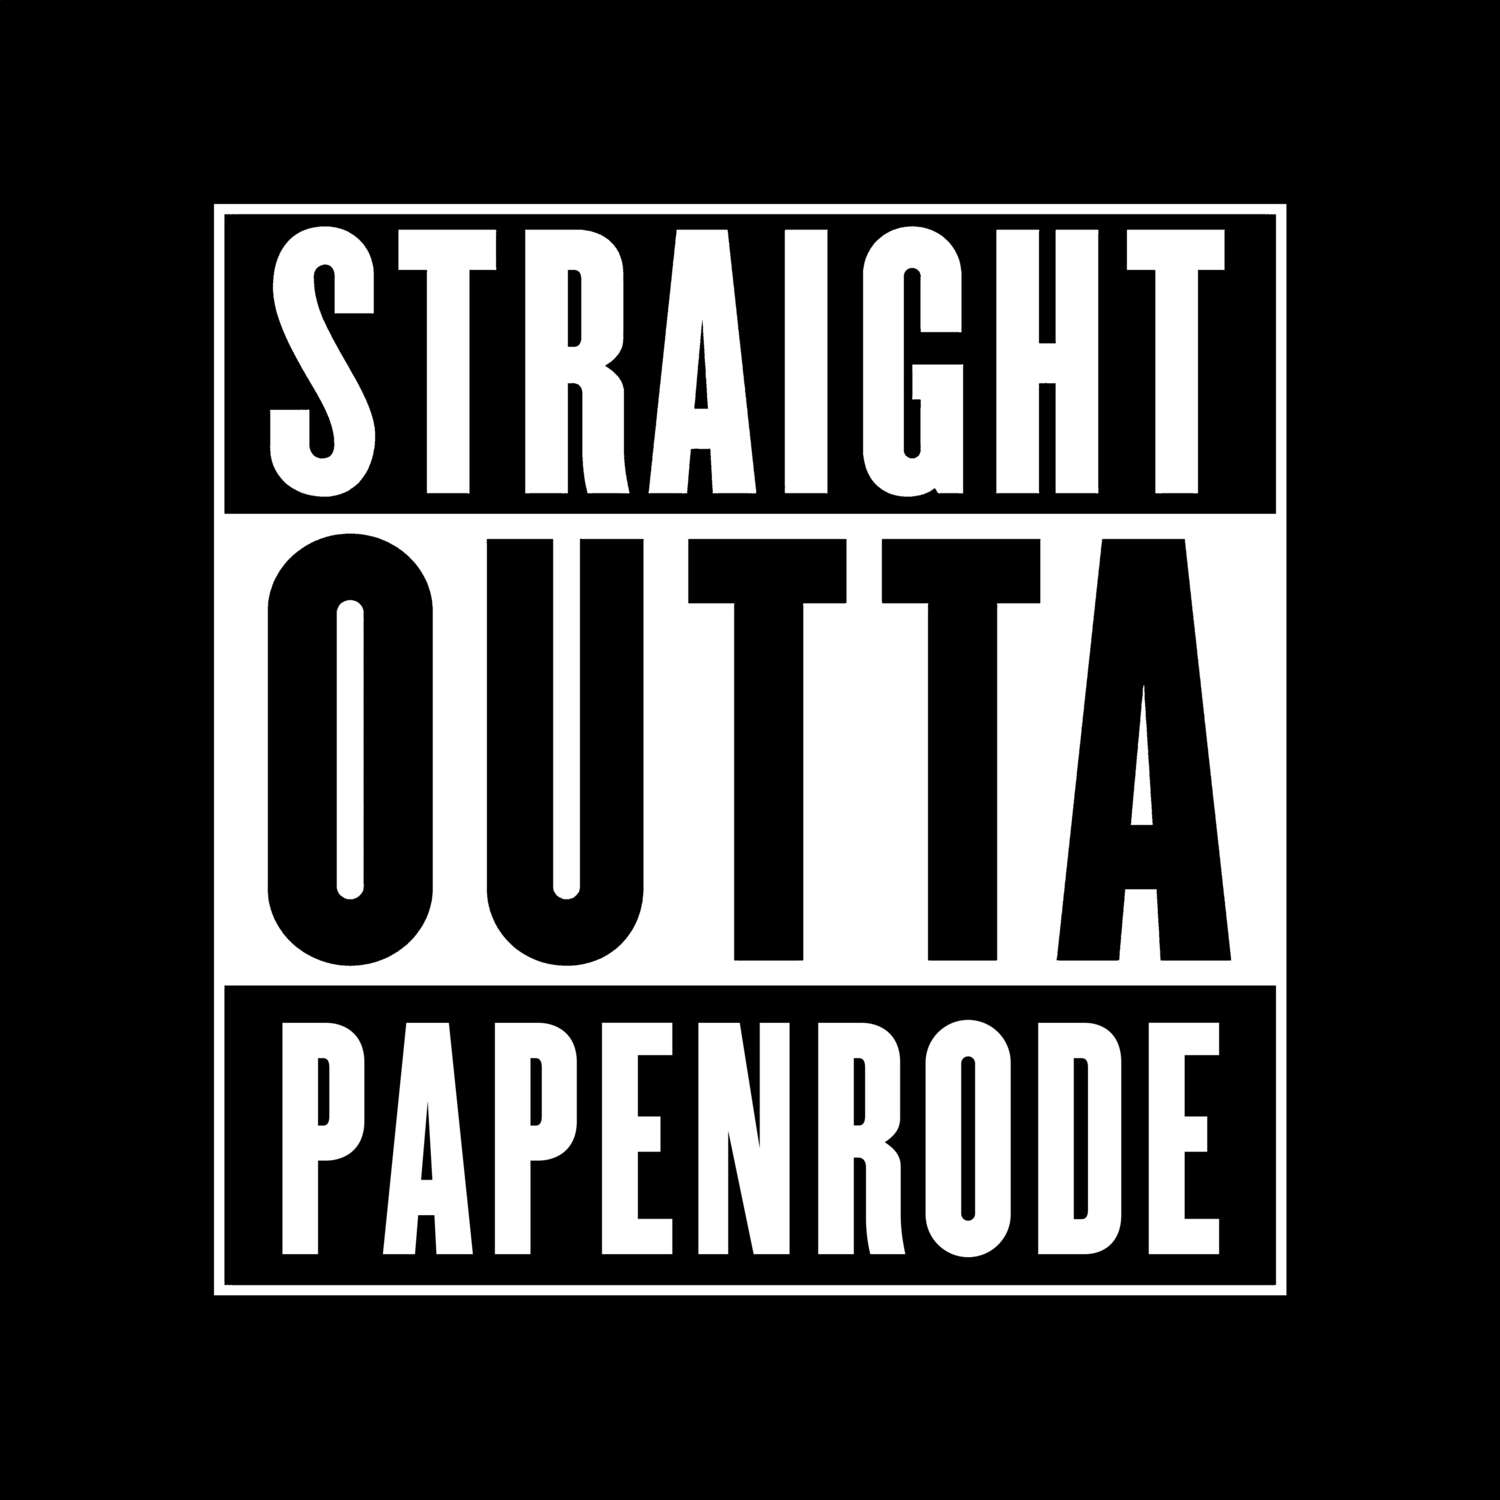 Papenrode T-Shirt »Straight Outta«